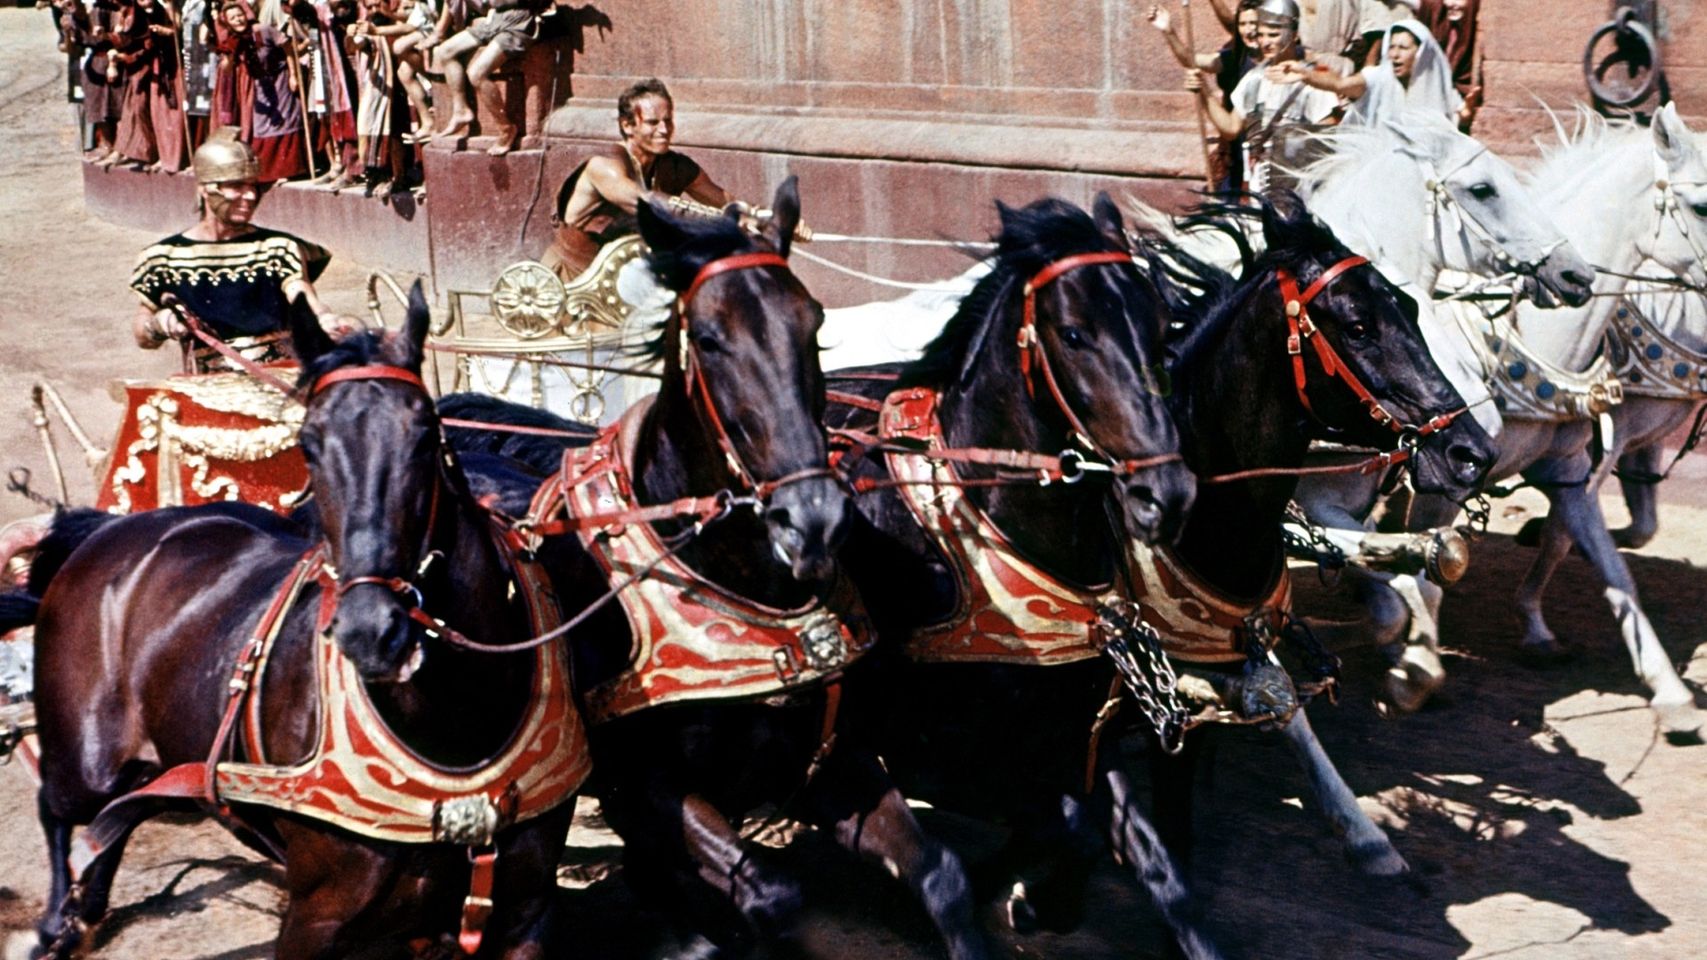 Exhilarating scene of a traditional chariot race, featuring horses and costumed riders reminiscent of historical times.